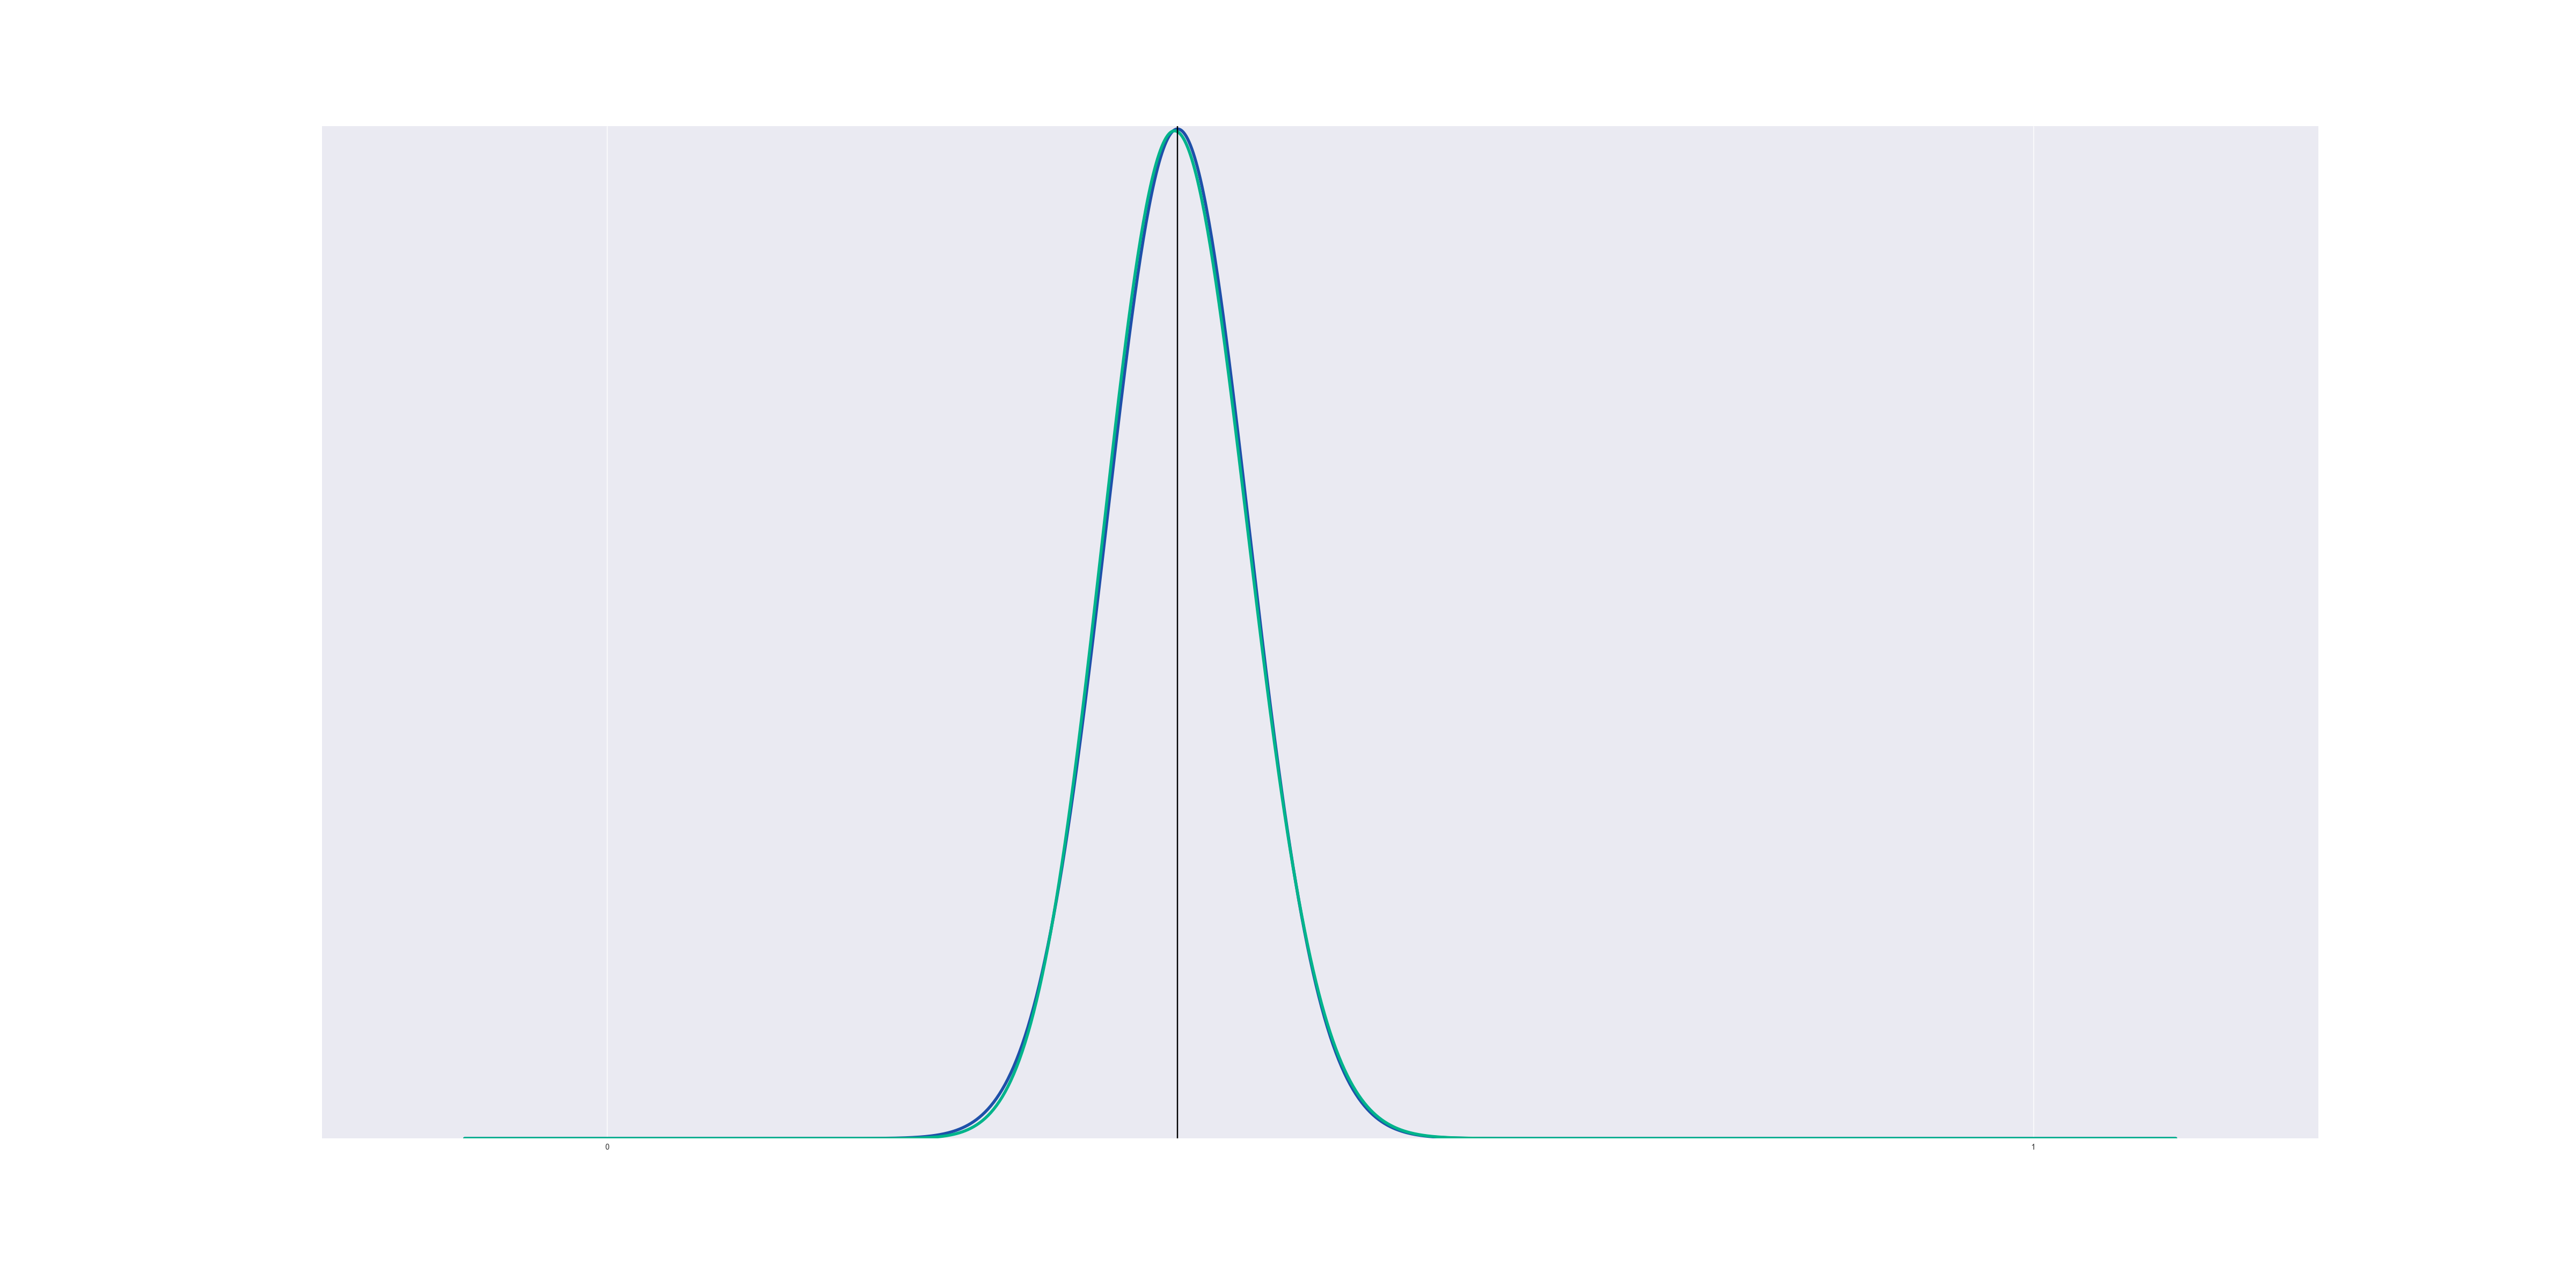 approximating gaussians with beta distributions